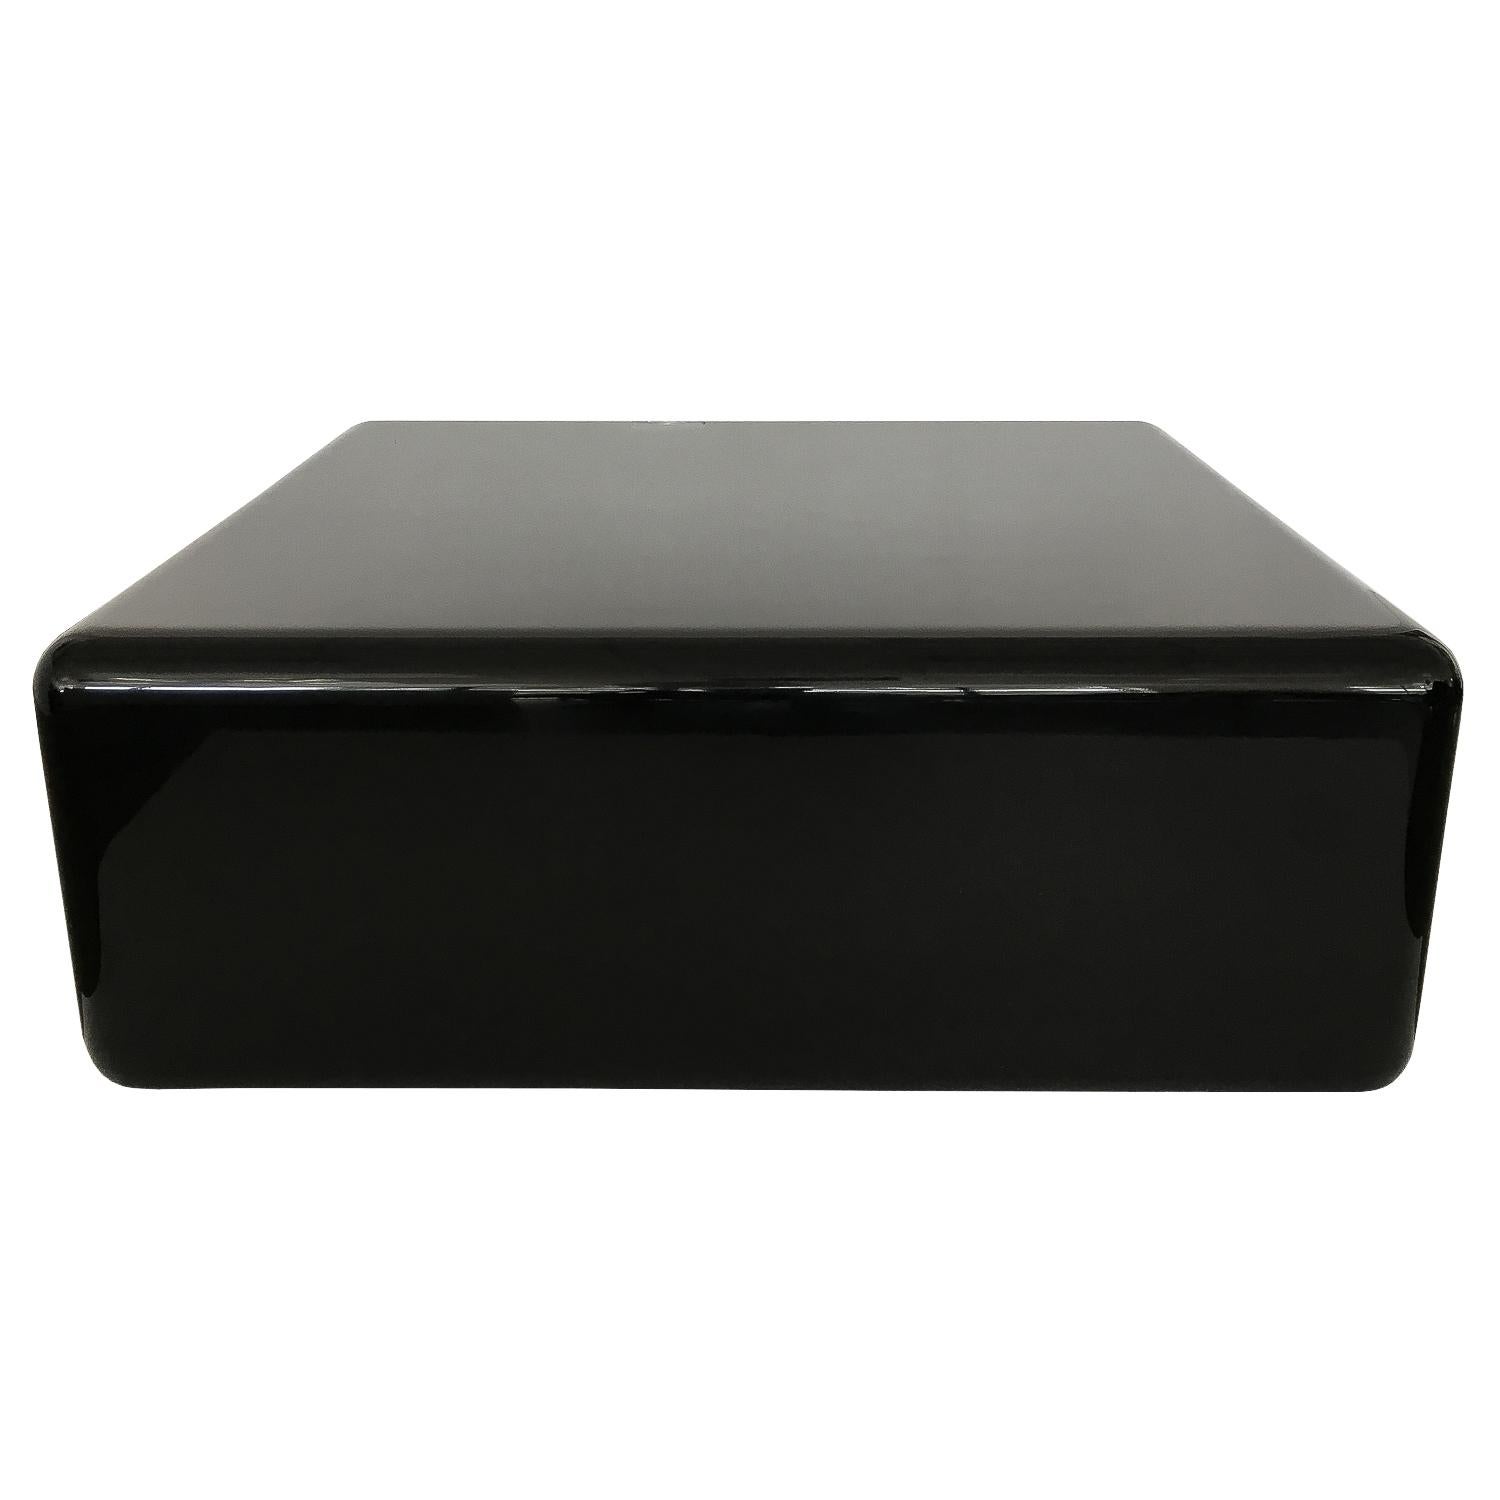 Gorgeous black gloss lacquered chiclet form coffee table designed by Milo Baughman for Thayer Coggin, circa 1970s. Square cocktail table with soft radius edges on all sides. High gloss finish. Monolithic and minimal in design. Thayer Coggin / Milo